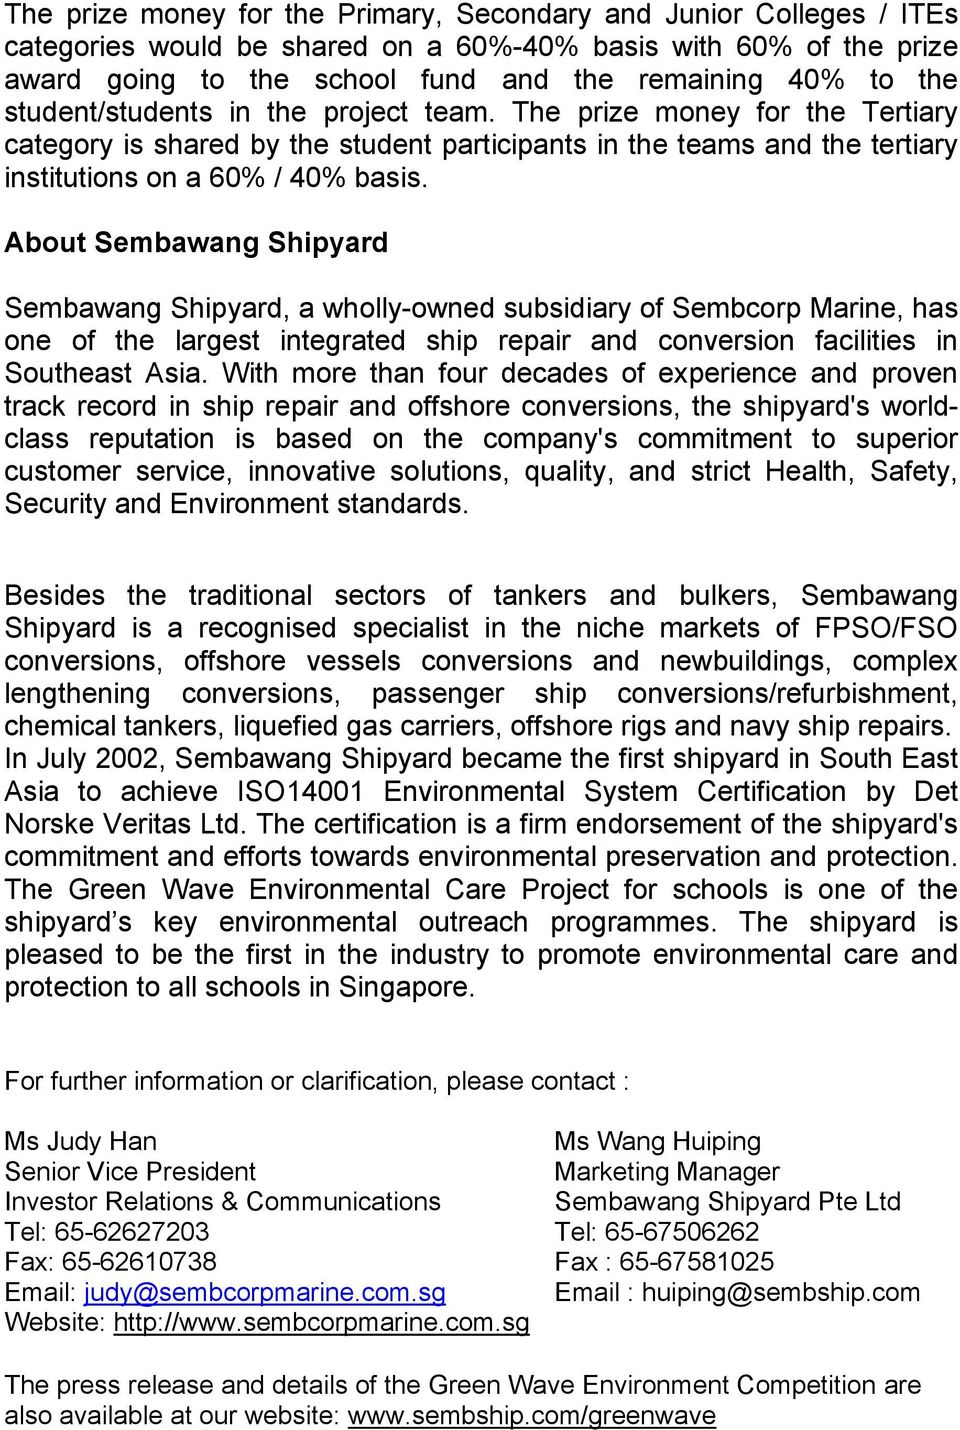 About Sembawang Shipyard Sembawang Shipyard, a wholly-owned subsidiary of Sembcorp Marine, has one of the largest integrated ship repair and conversion facilities in Southeast Asia.